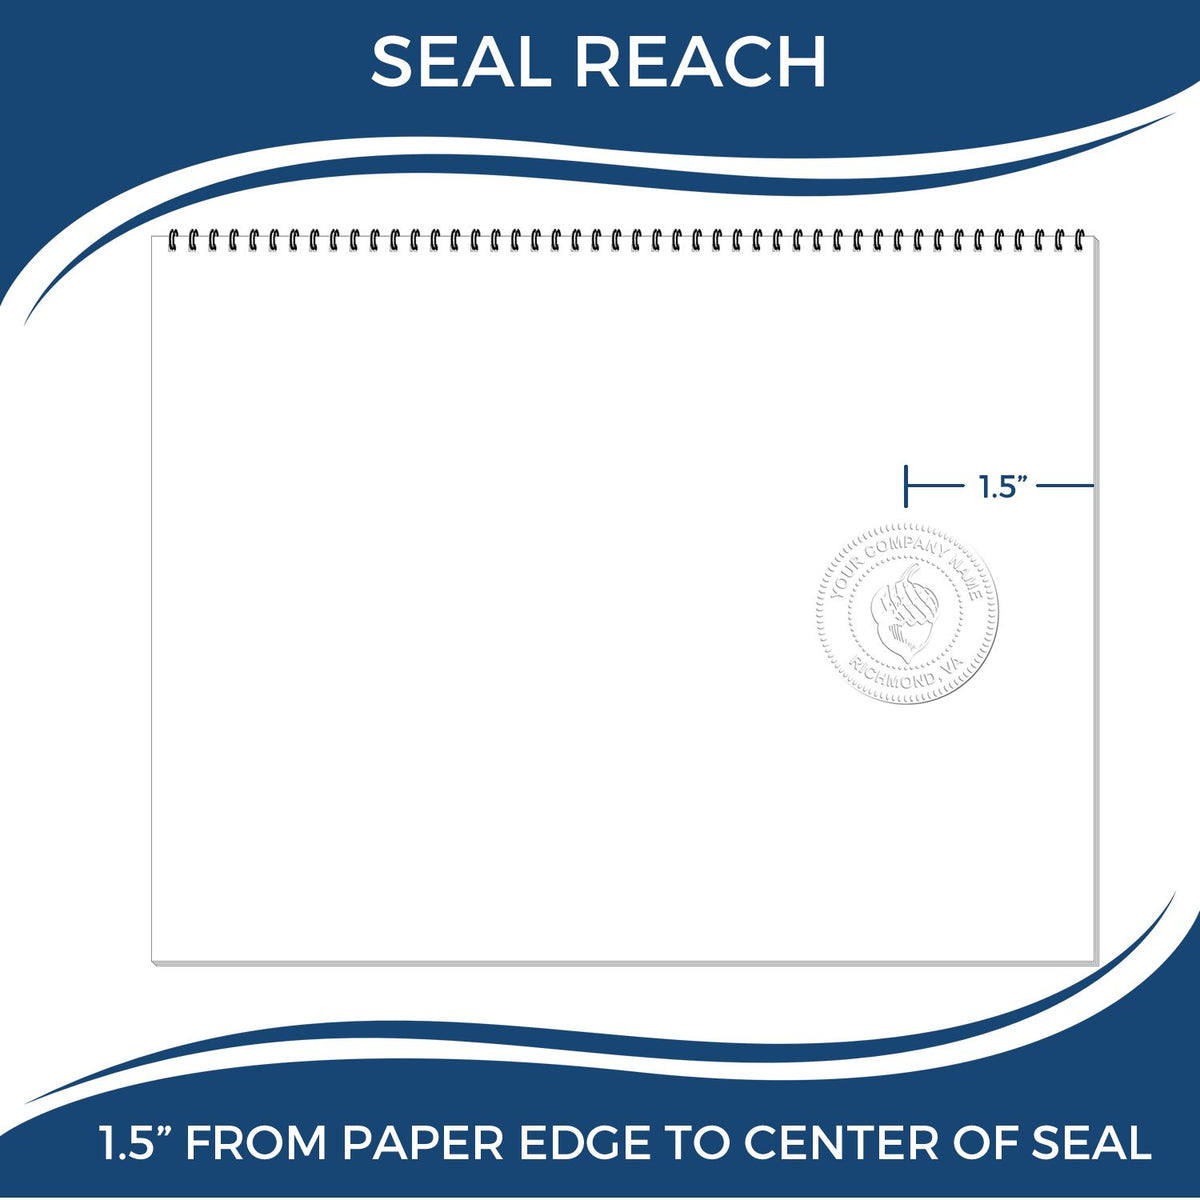 An infographic showing the seal reach which is represented by a ruler and a miniature seal image of the State of Wyoming Architectural Seal Embosser